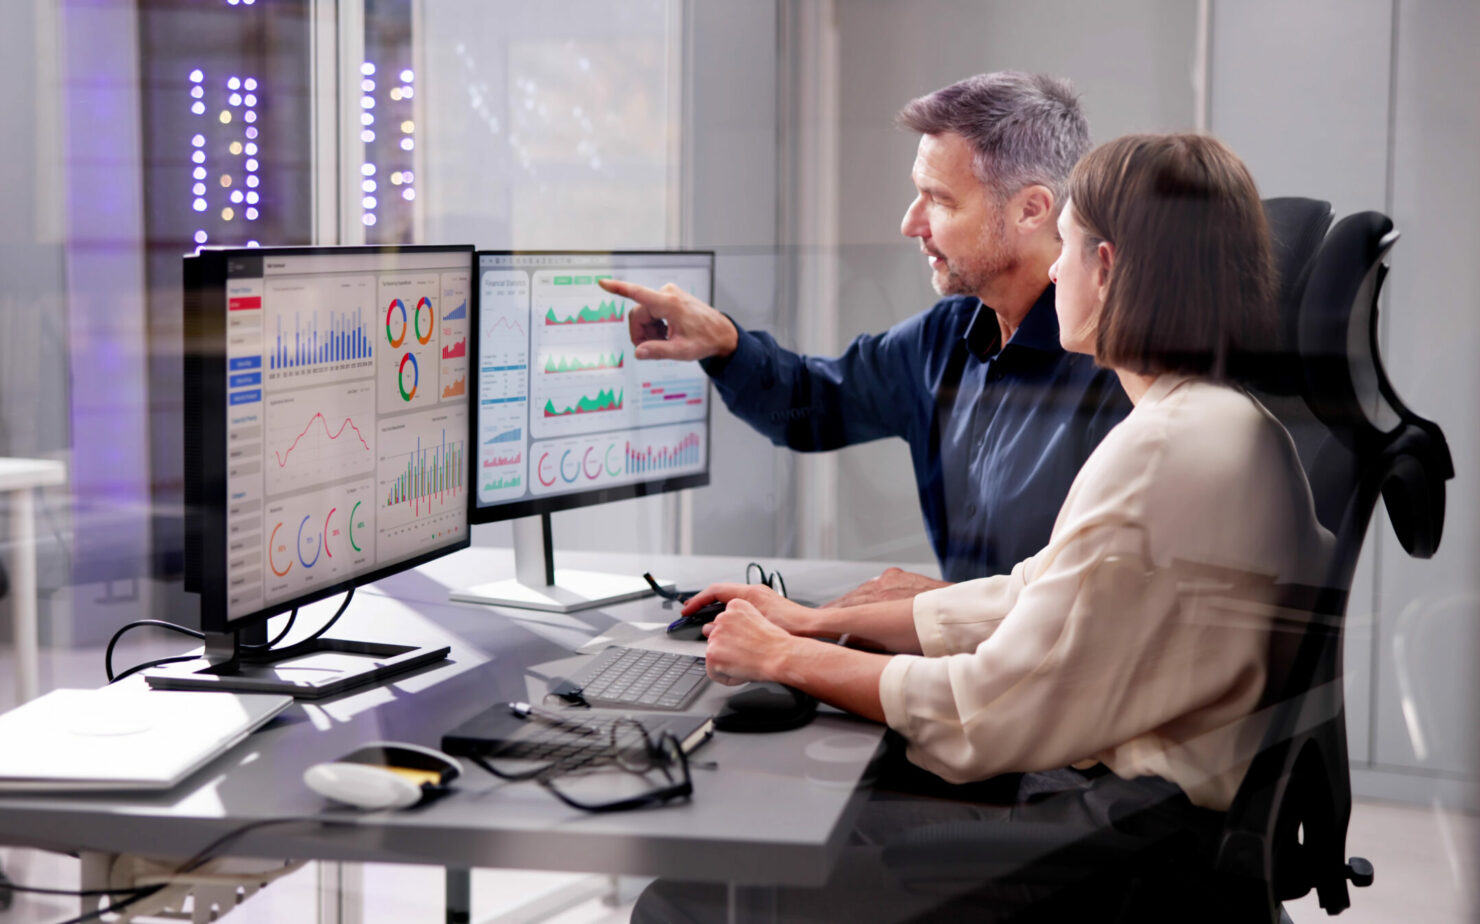 Woman and men are analyzing a dashboard on a monitor.